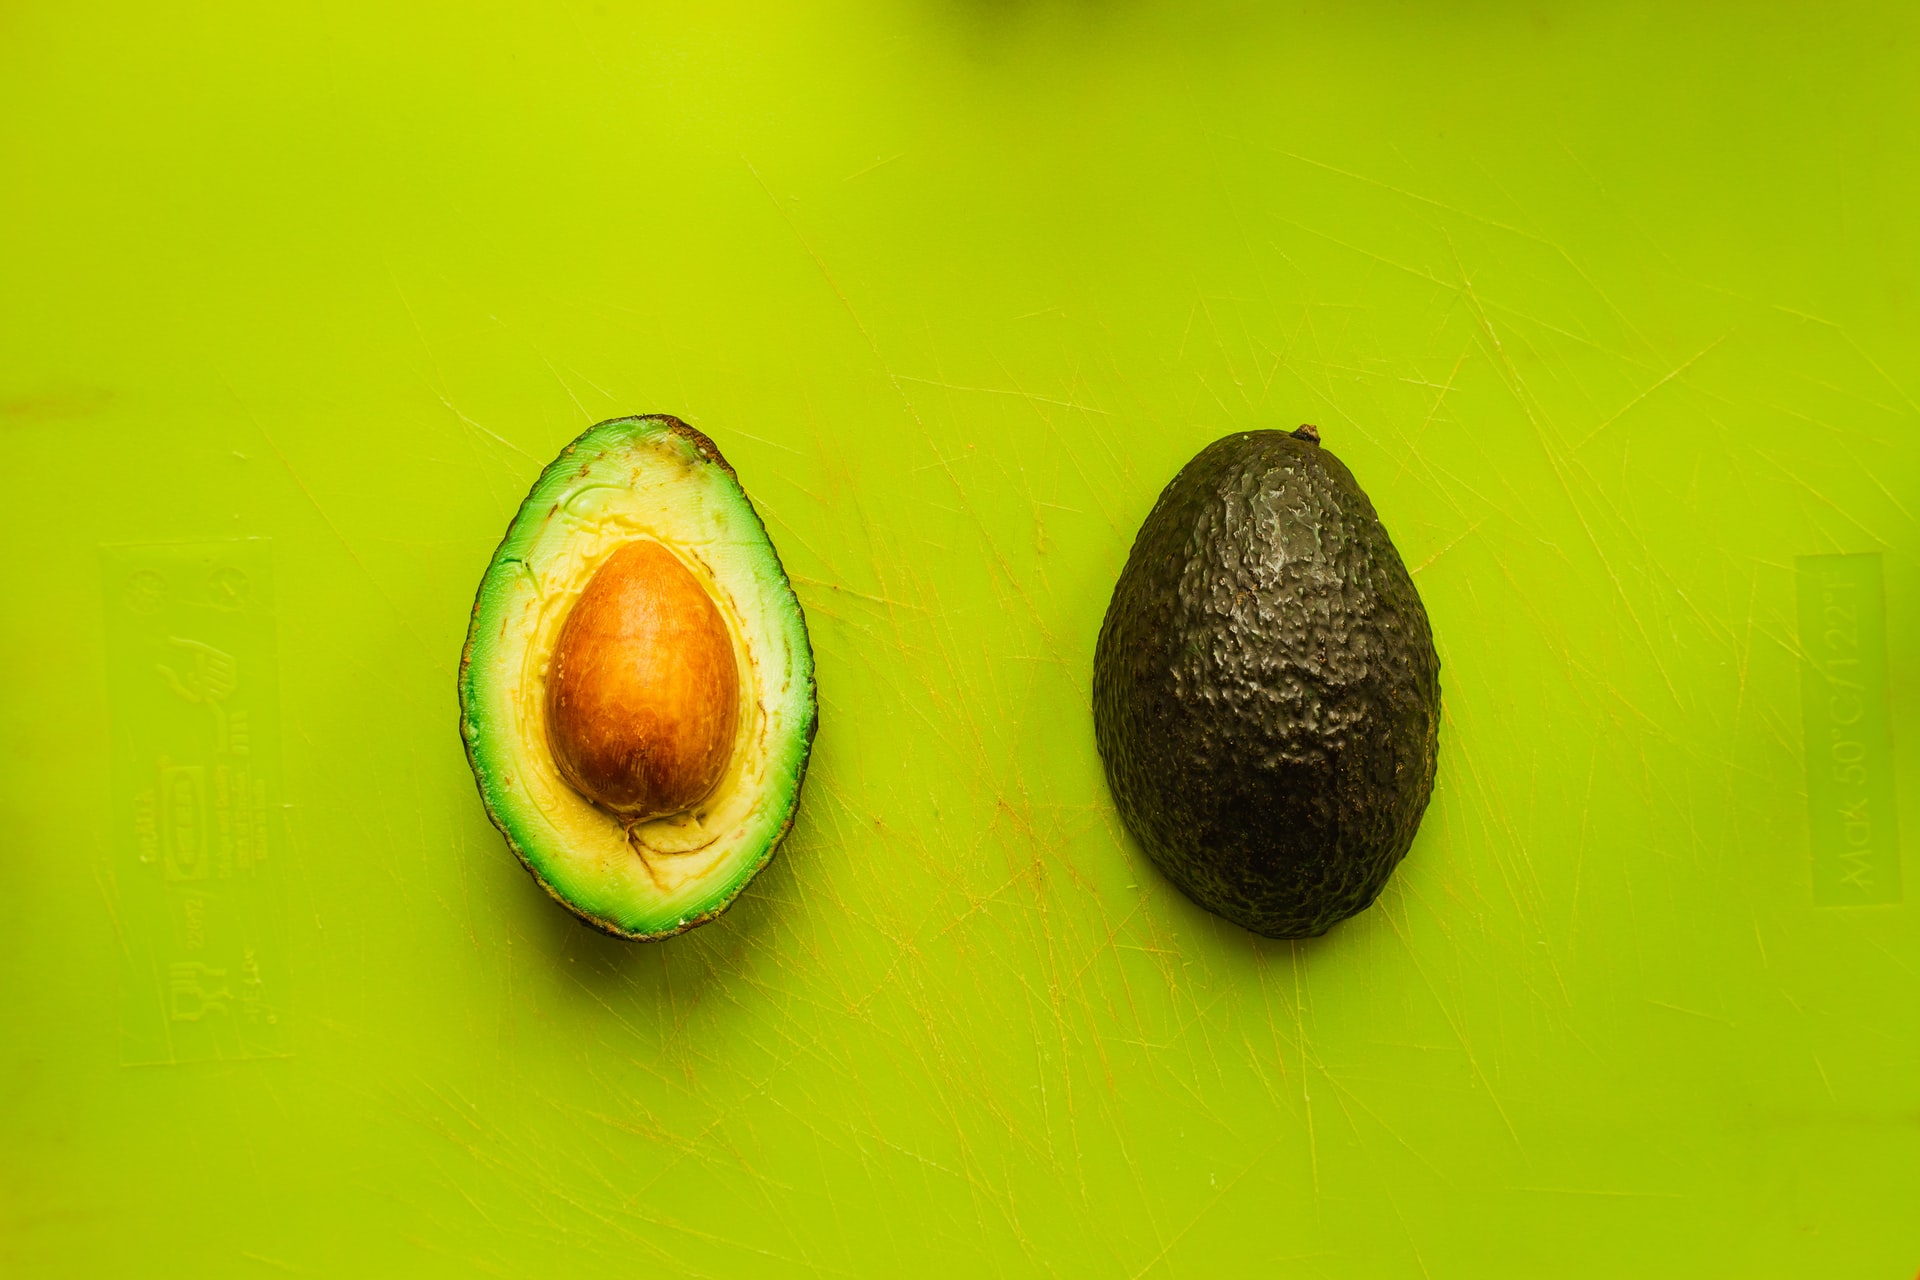 How to Plant Your First Avocado During Quarantine 8